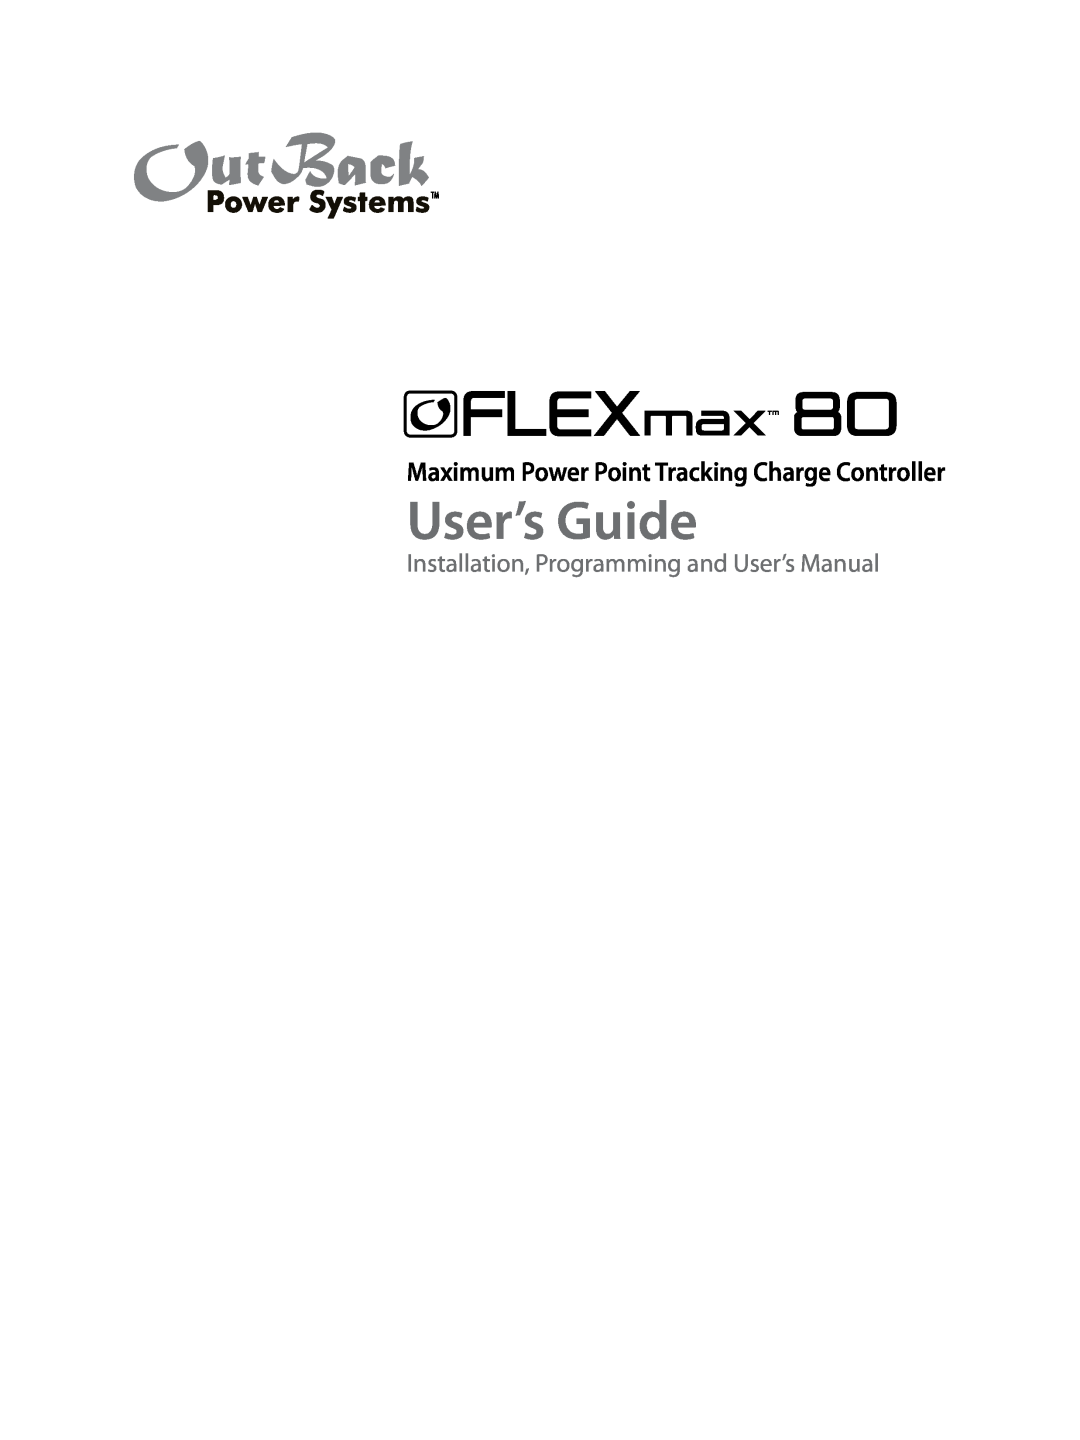 Outback Power Systems 80 user manual Maximum Power Point Tracking Charge Controller, User’s Guide, maxT M 